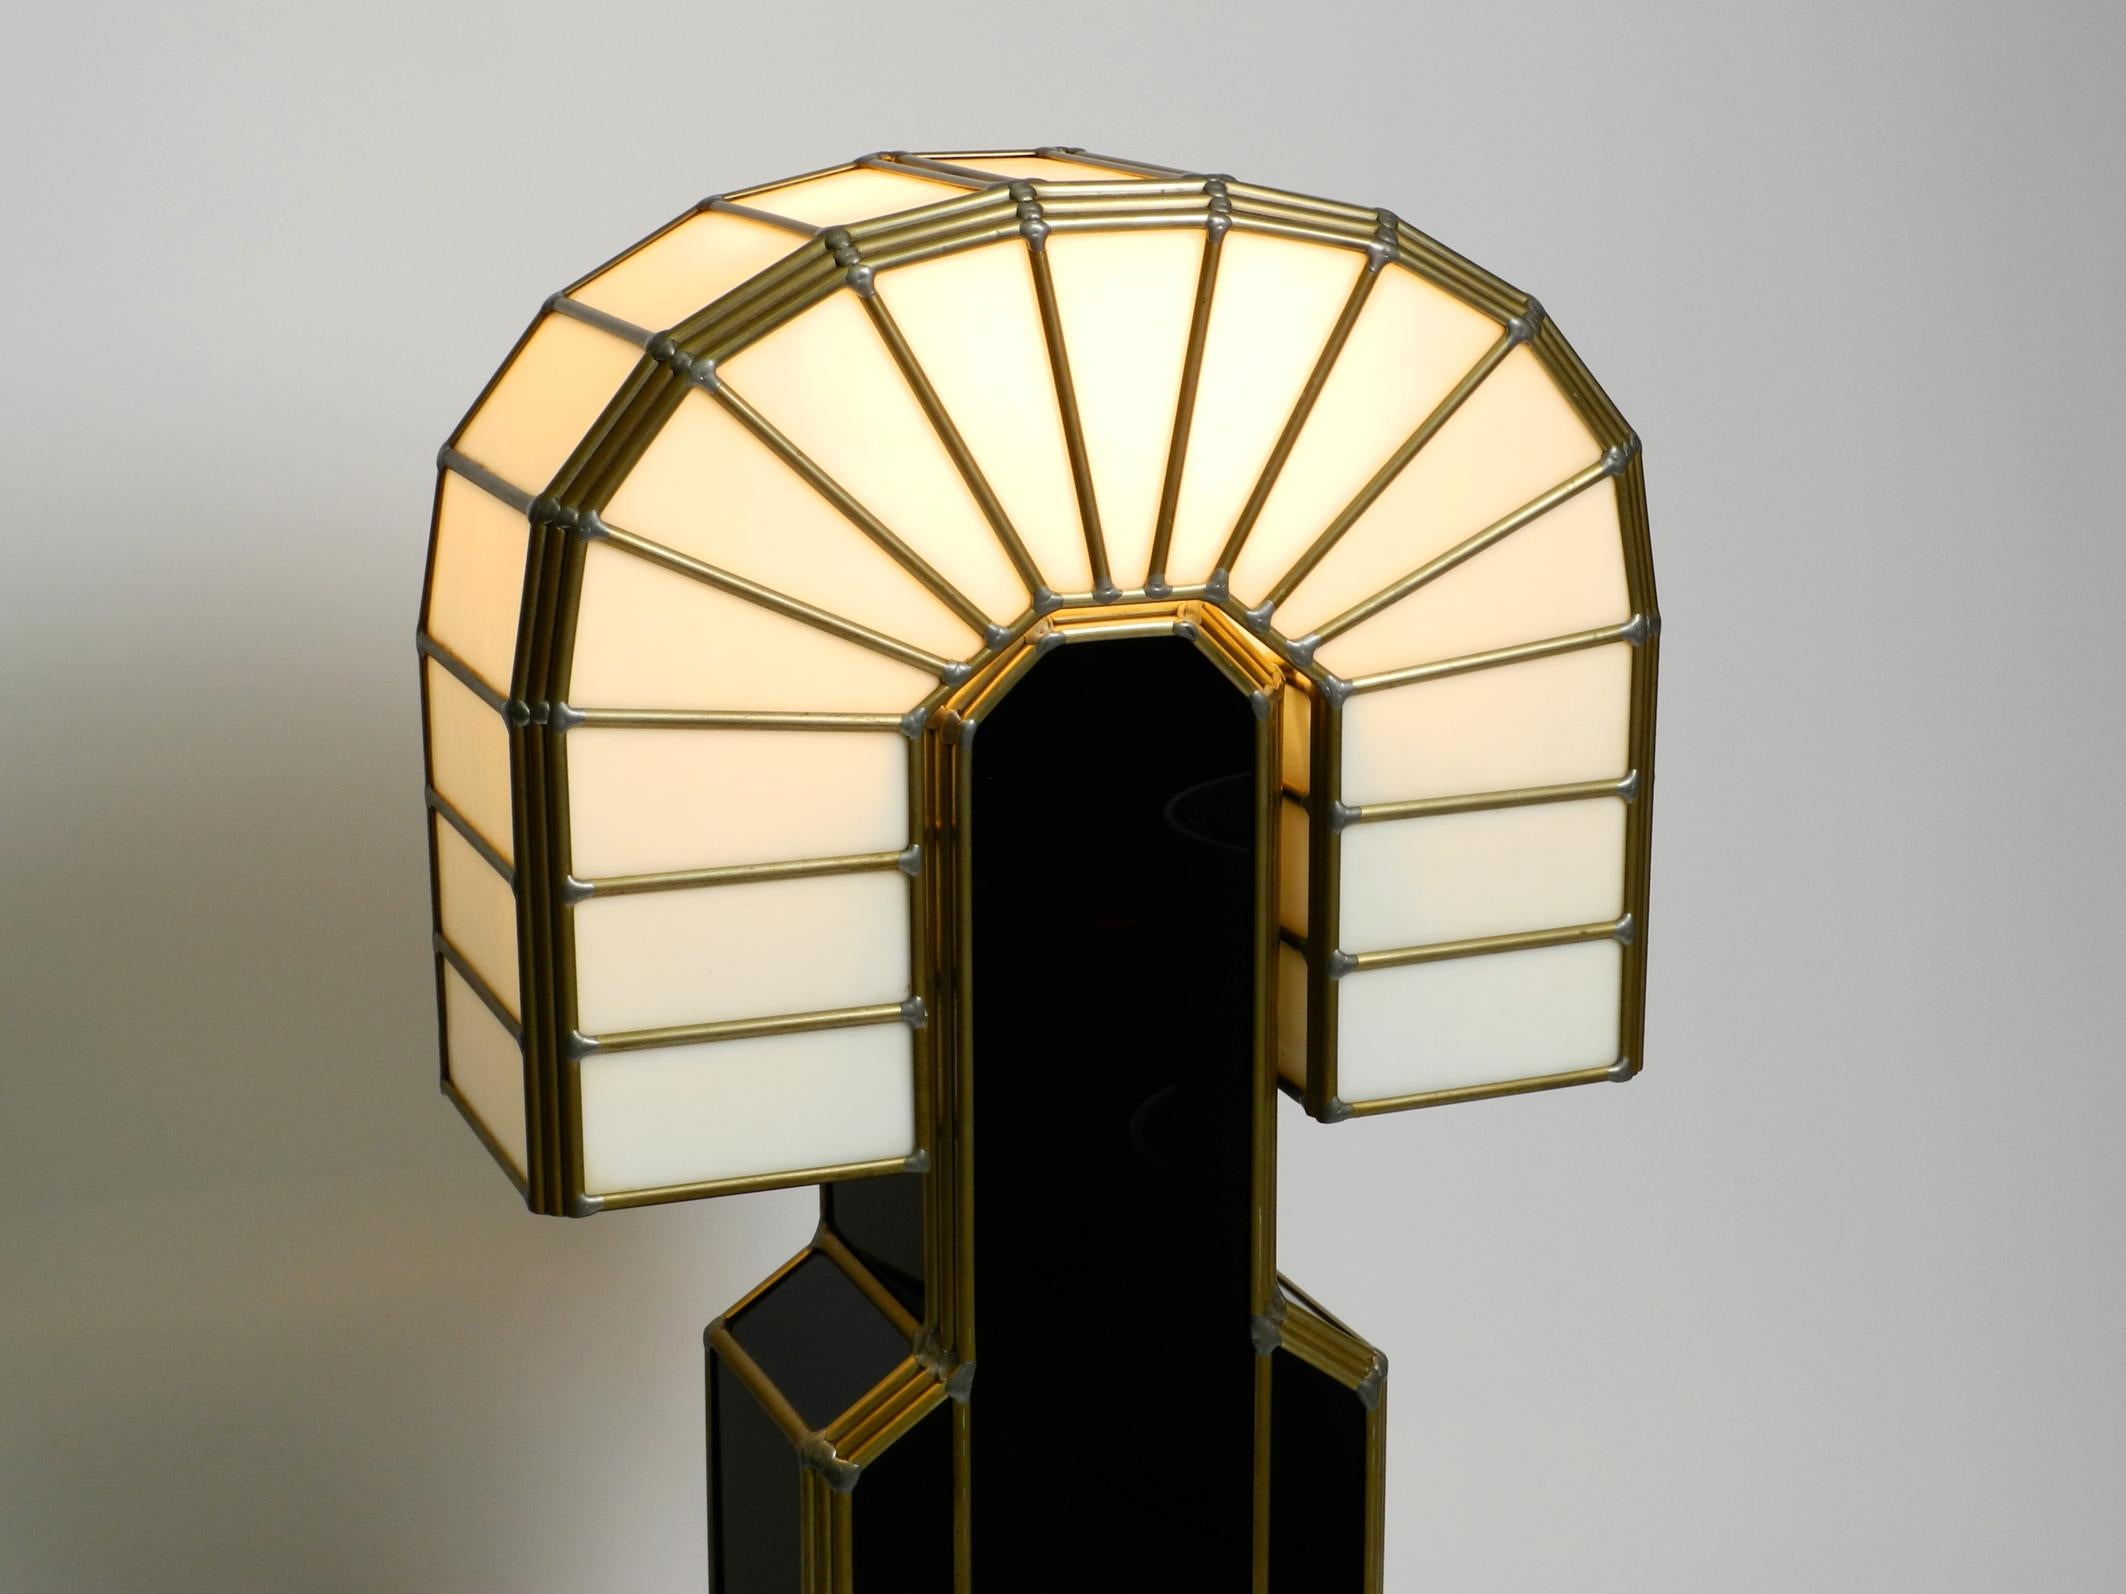 Late 20th Century Limited Huge Postmodern Art Deco Tiffany Design Table or Floor Lamp from 1980